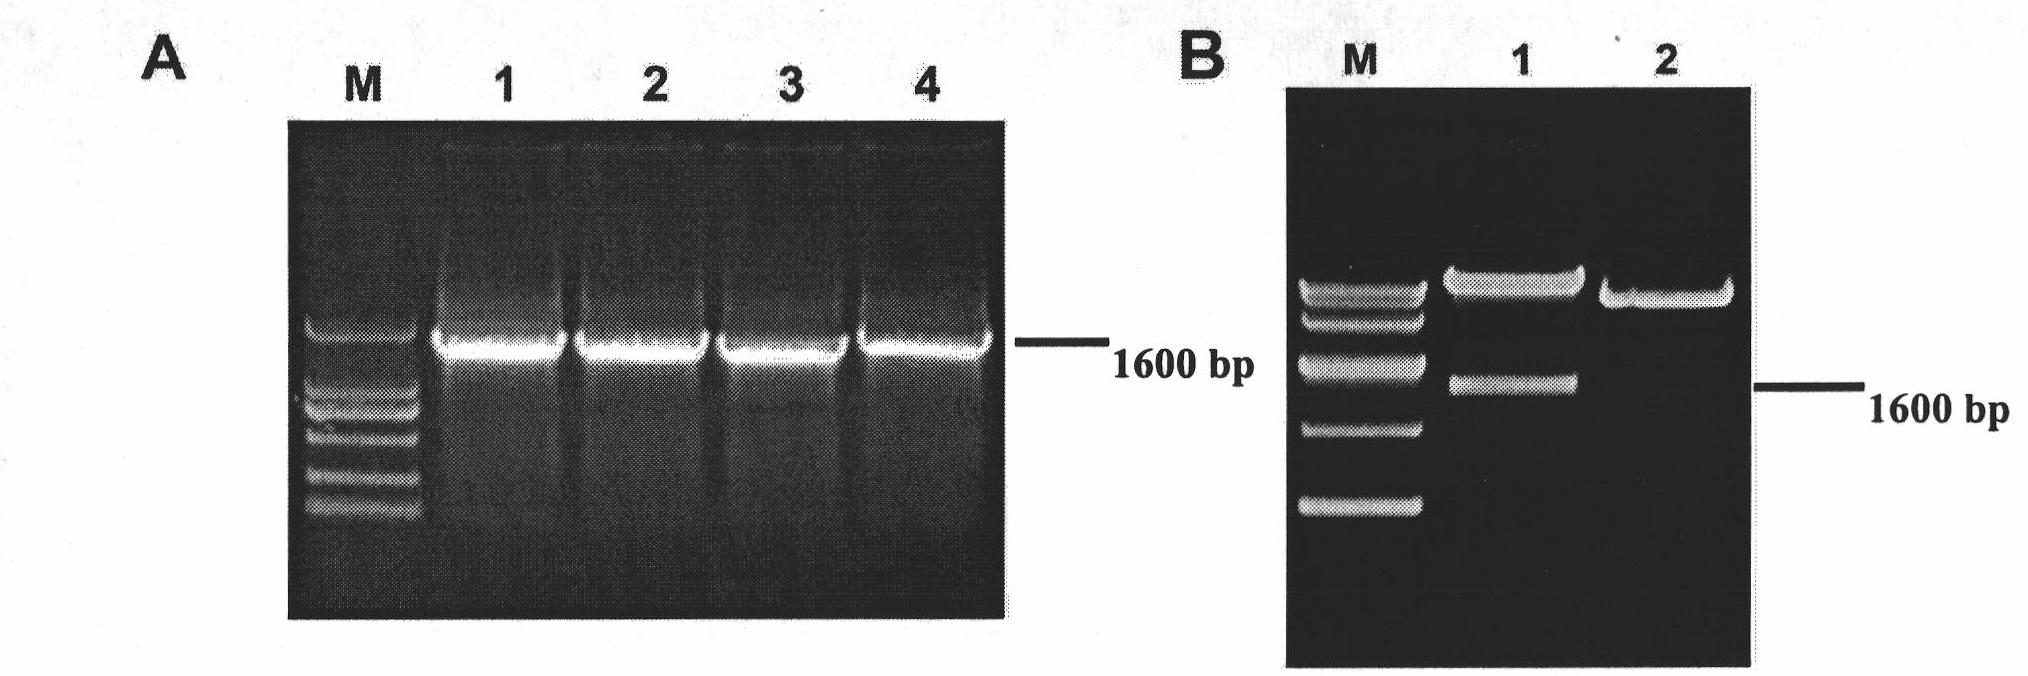 Maize DWF4 gene and expression vector, application and plant thereof